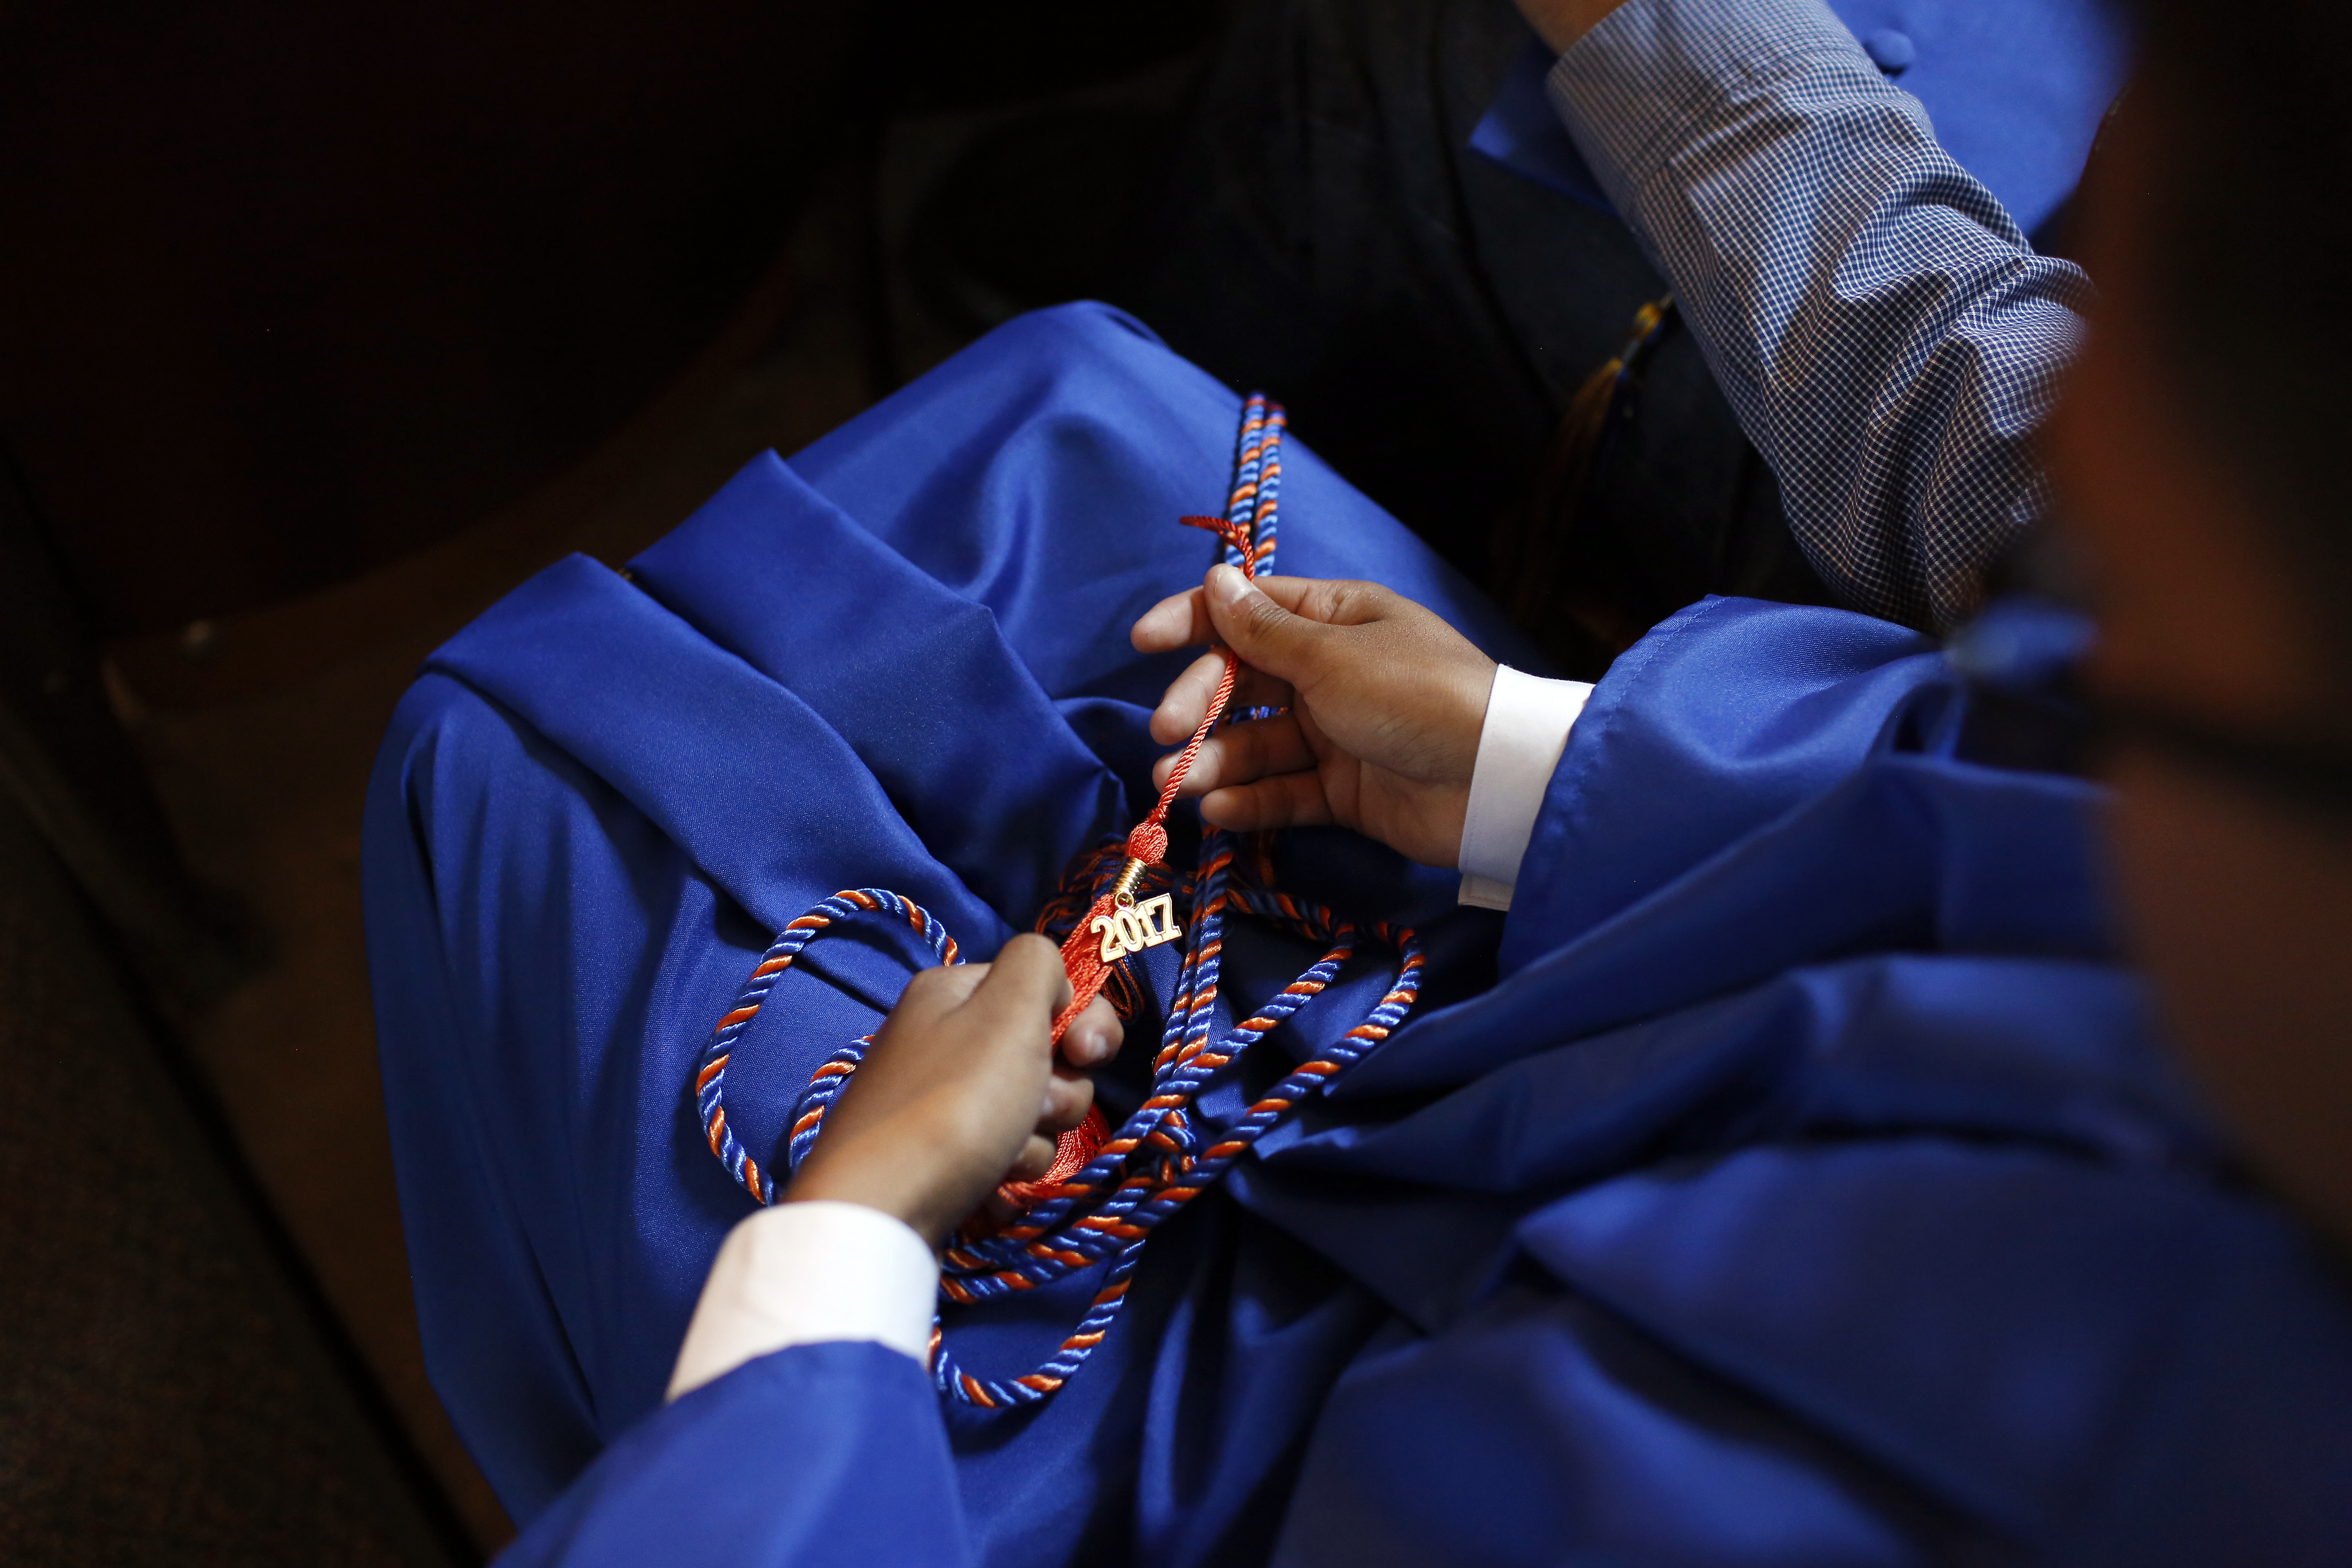 Joel Luera receives an honor cord and a 2017 graduation tassel while attending a Gratitude Ceremony for W. W. Samuell Early College High School in Dallas, Texas on Saturday, May 6, 2017. (photo © Lara Solt)